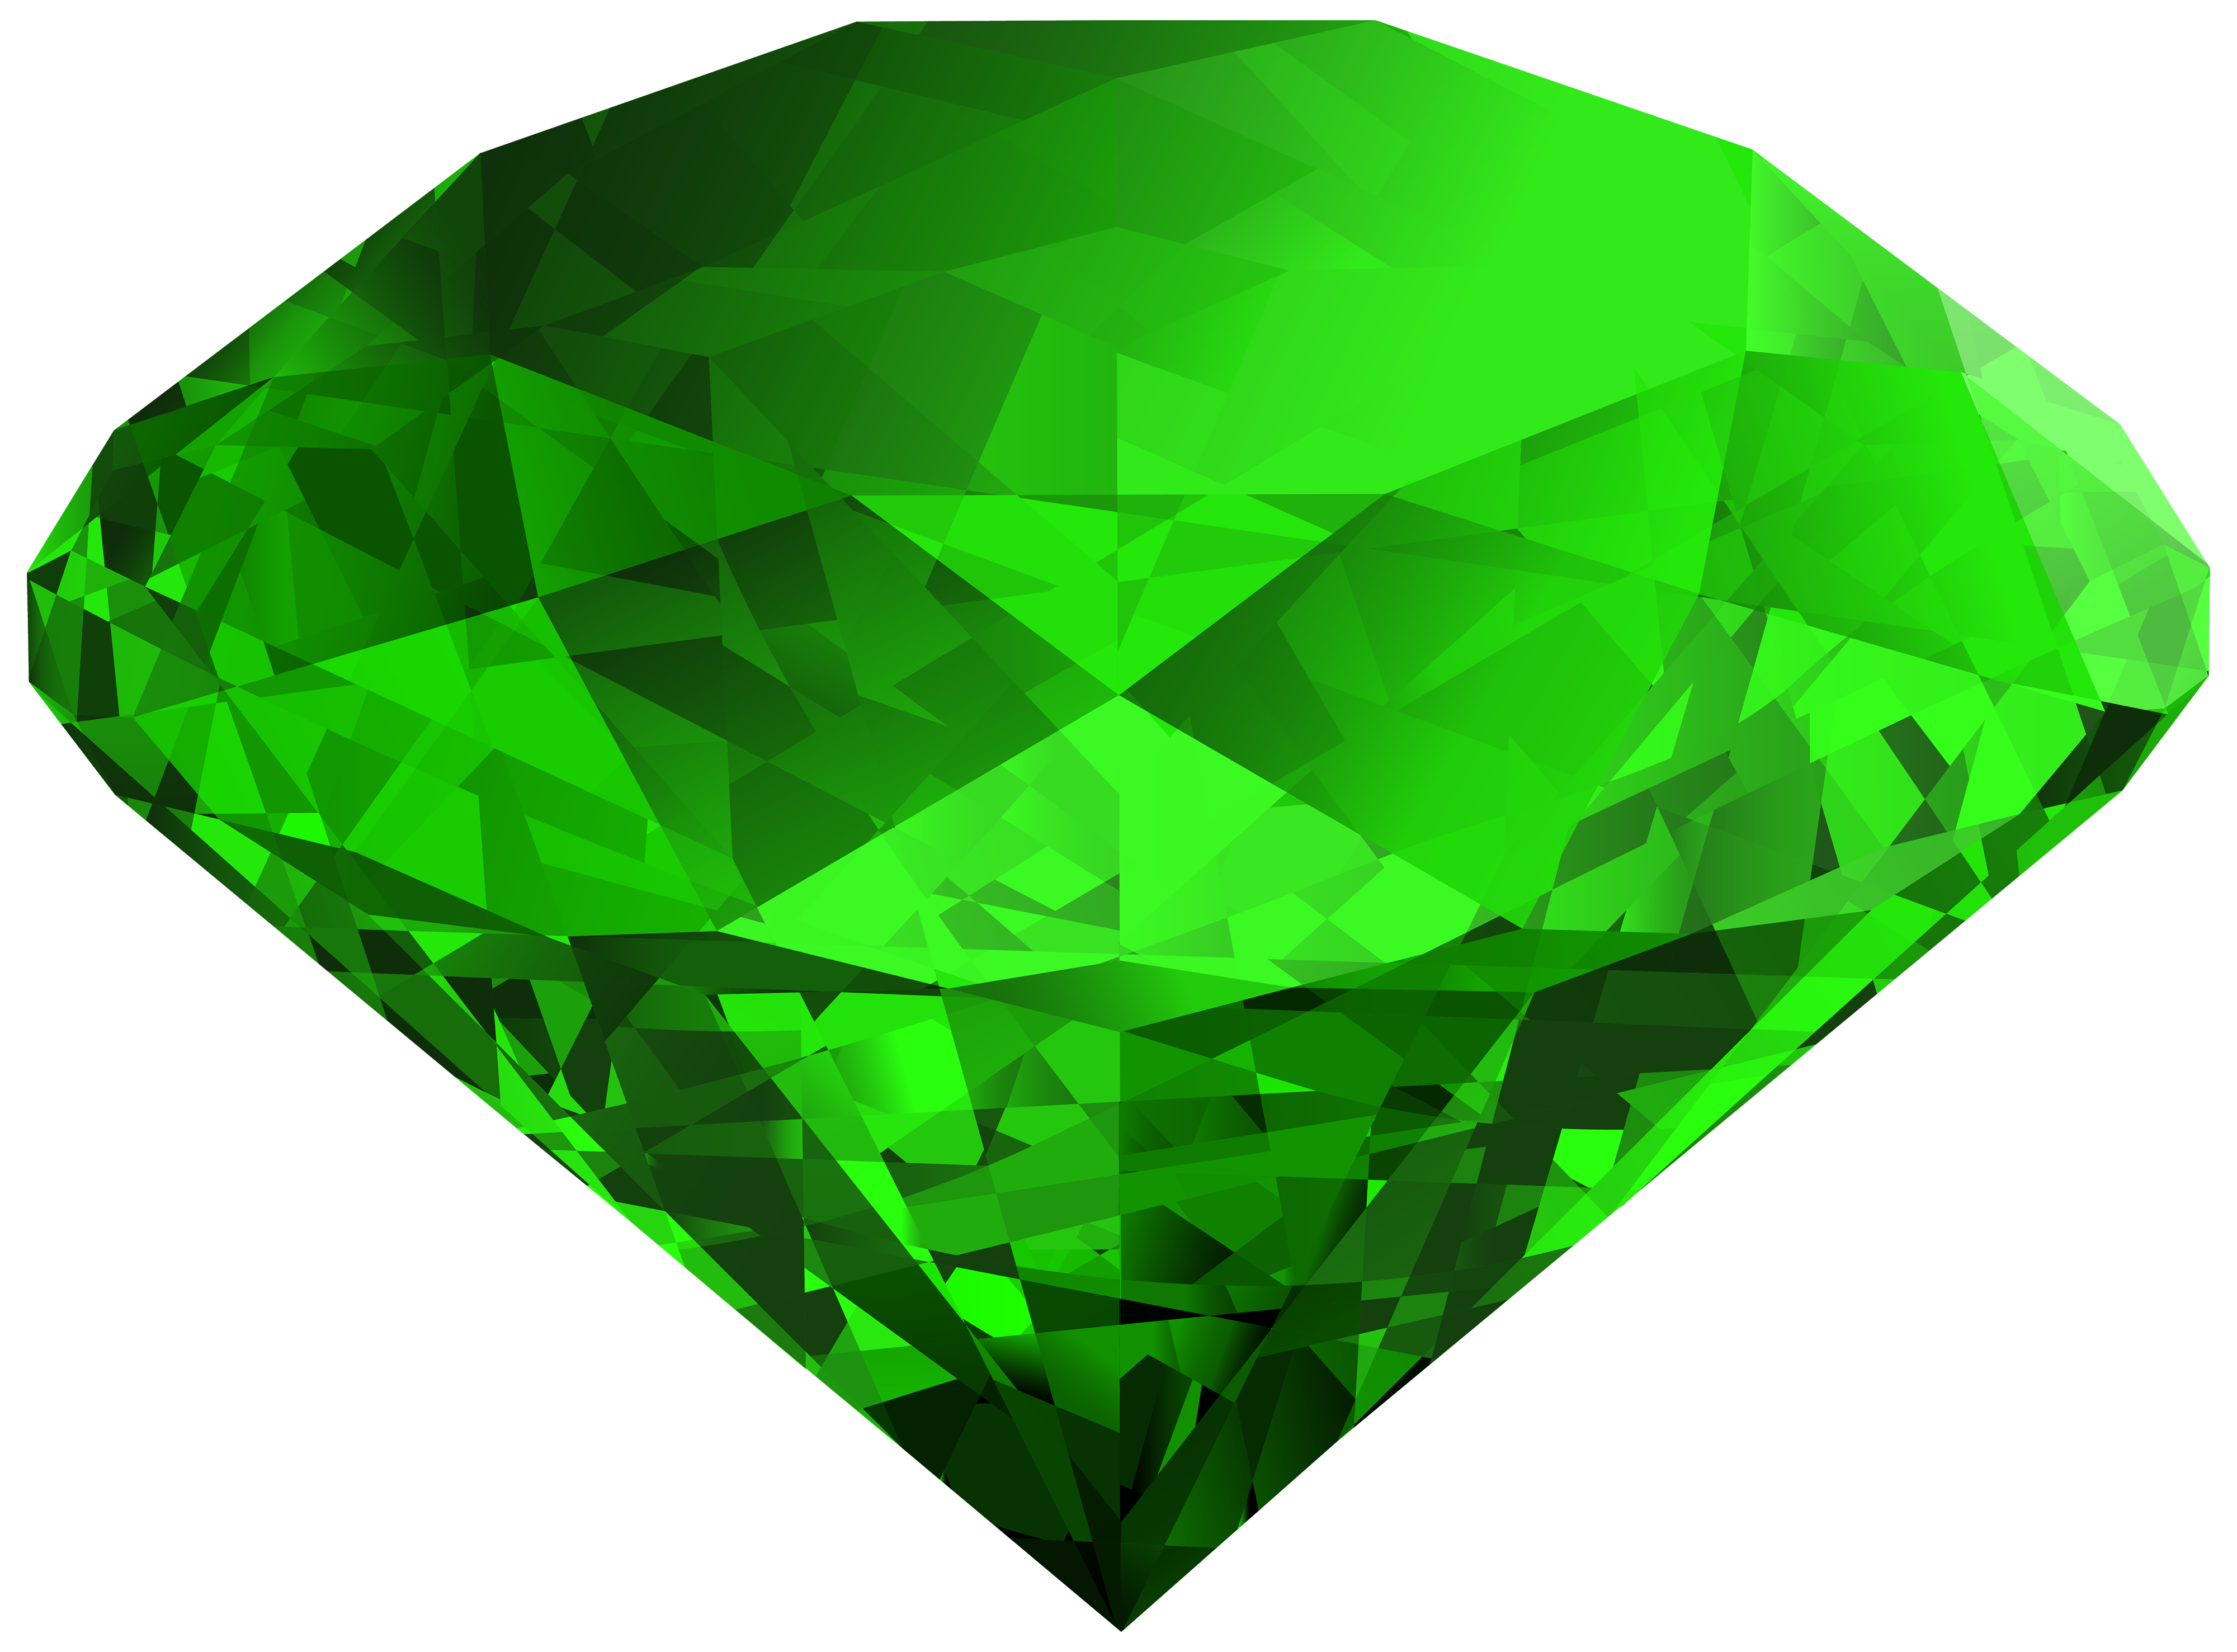 oval clipart emerald